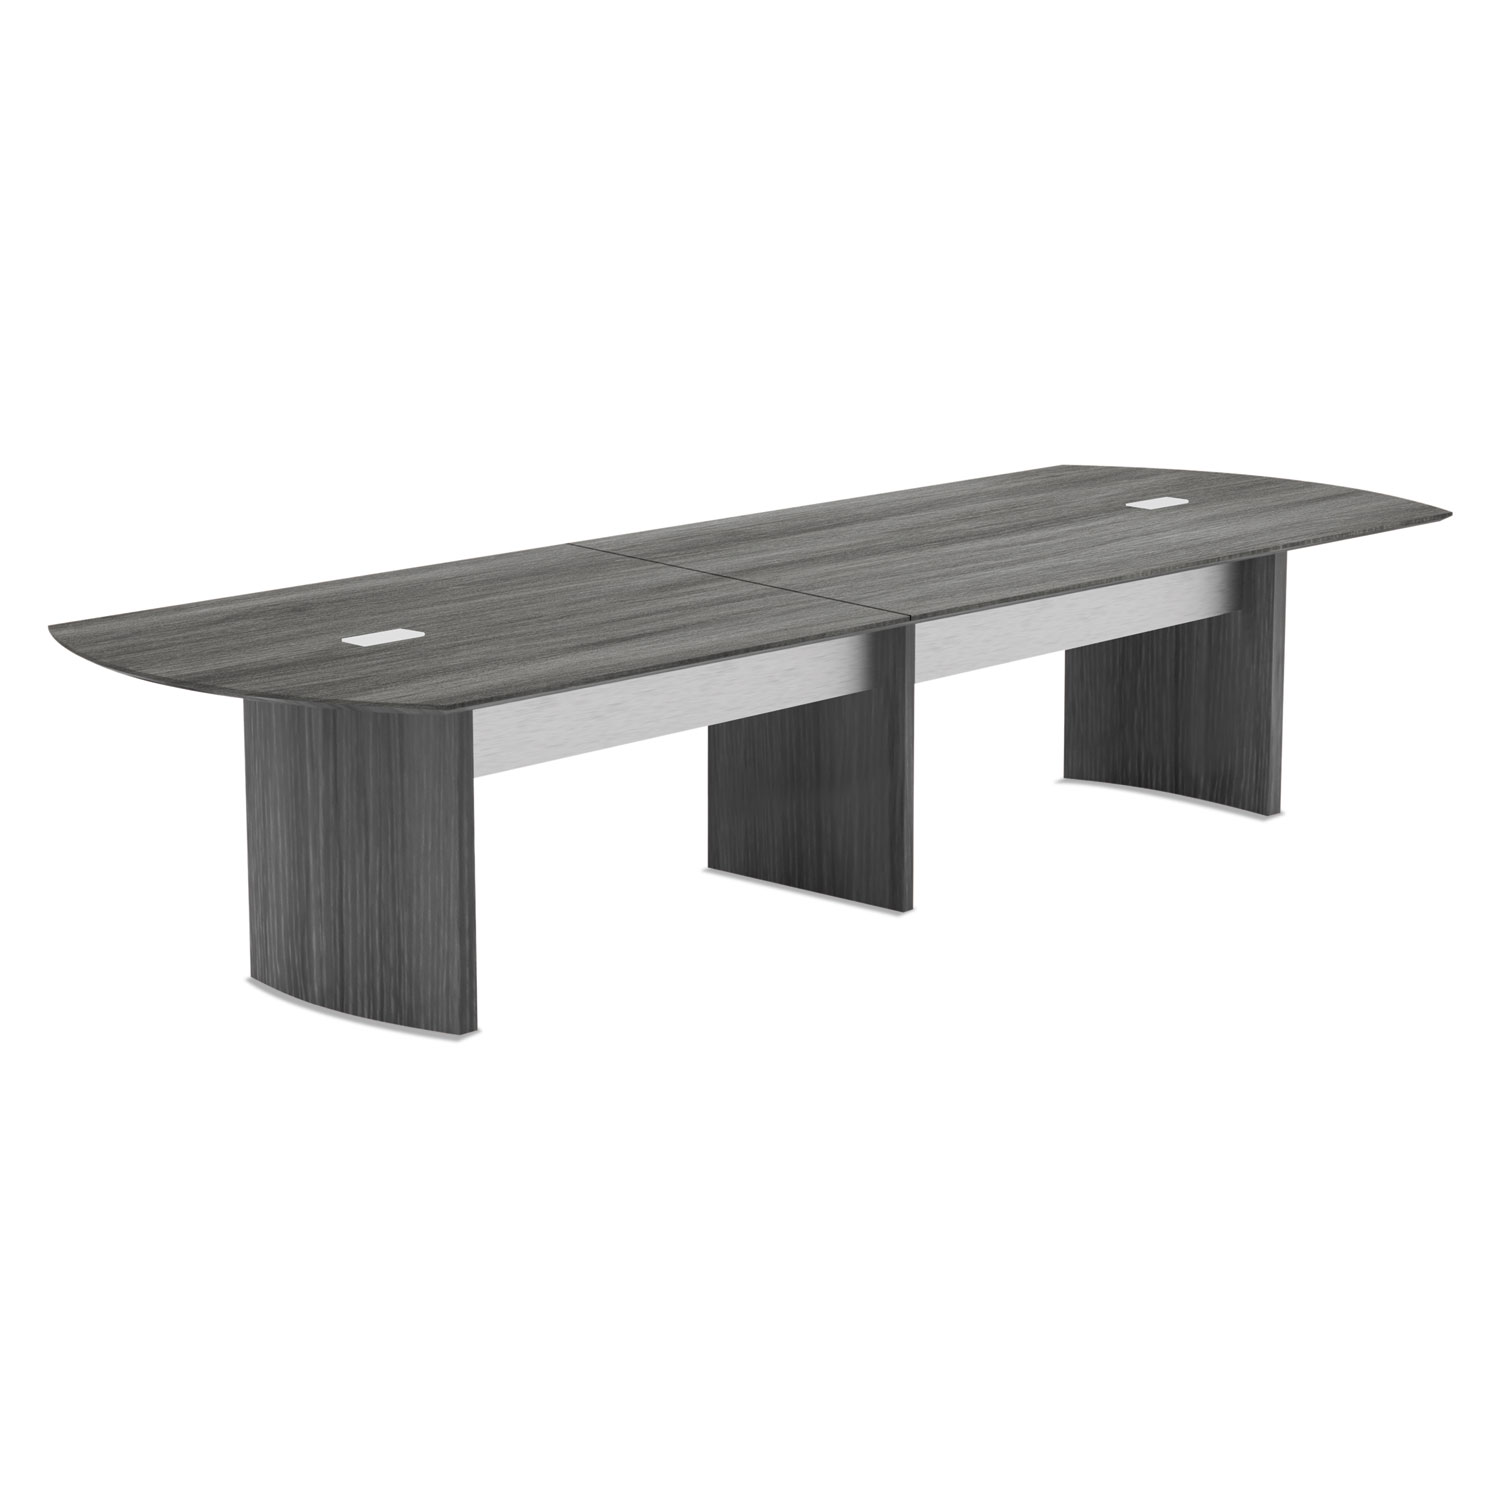  Safco MNMT84STLGS Medina Conference Table Top, Half-Section, 84 x 48, Gray Steel (MLNMNMT84STLGS) 